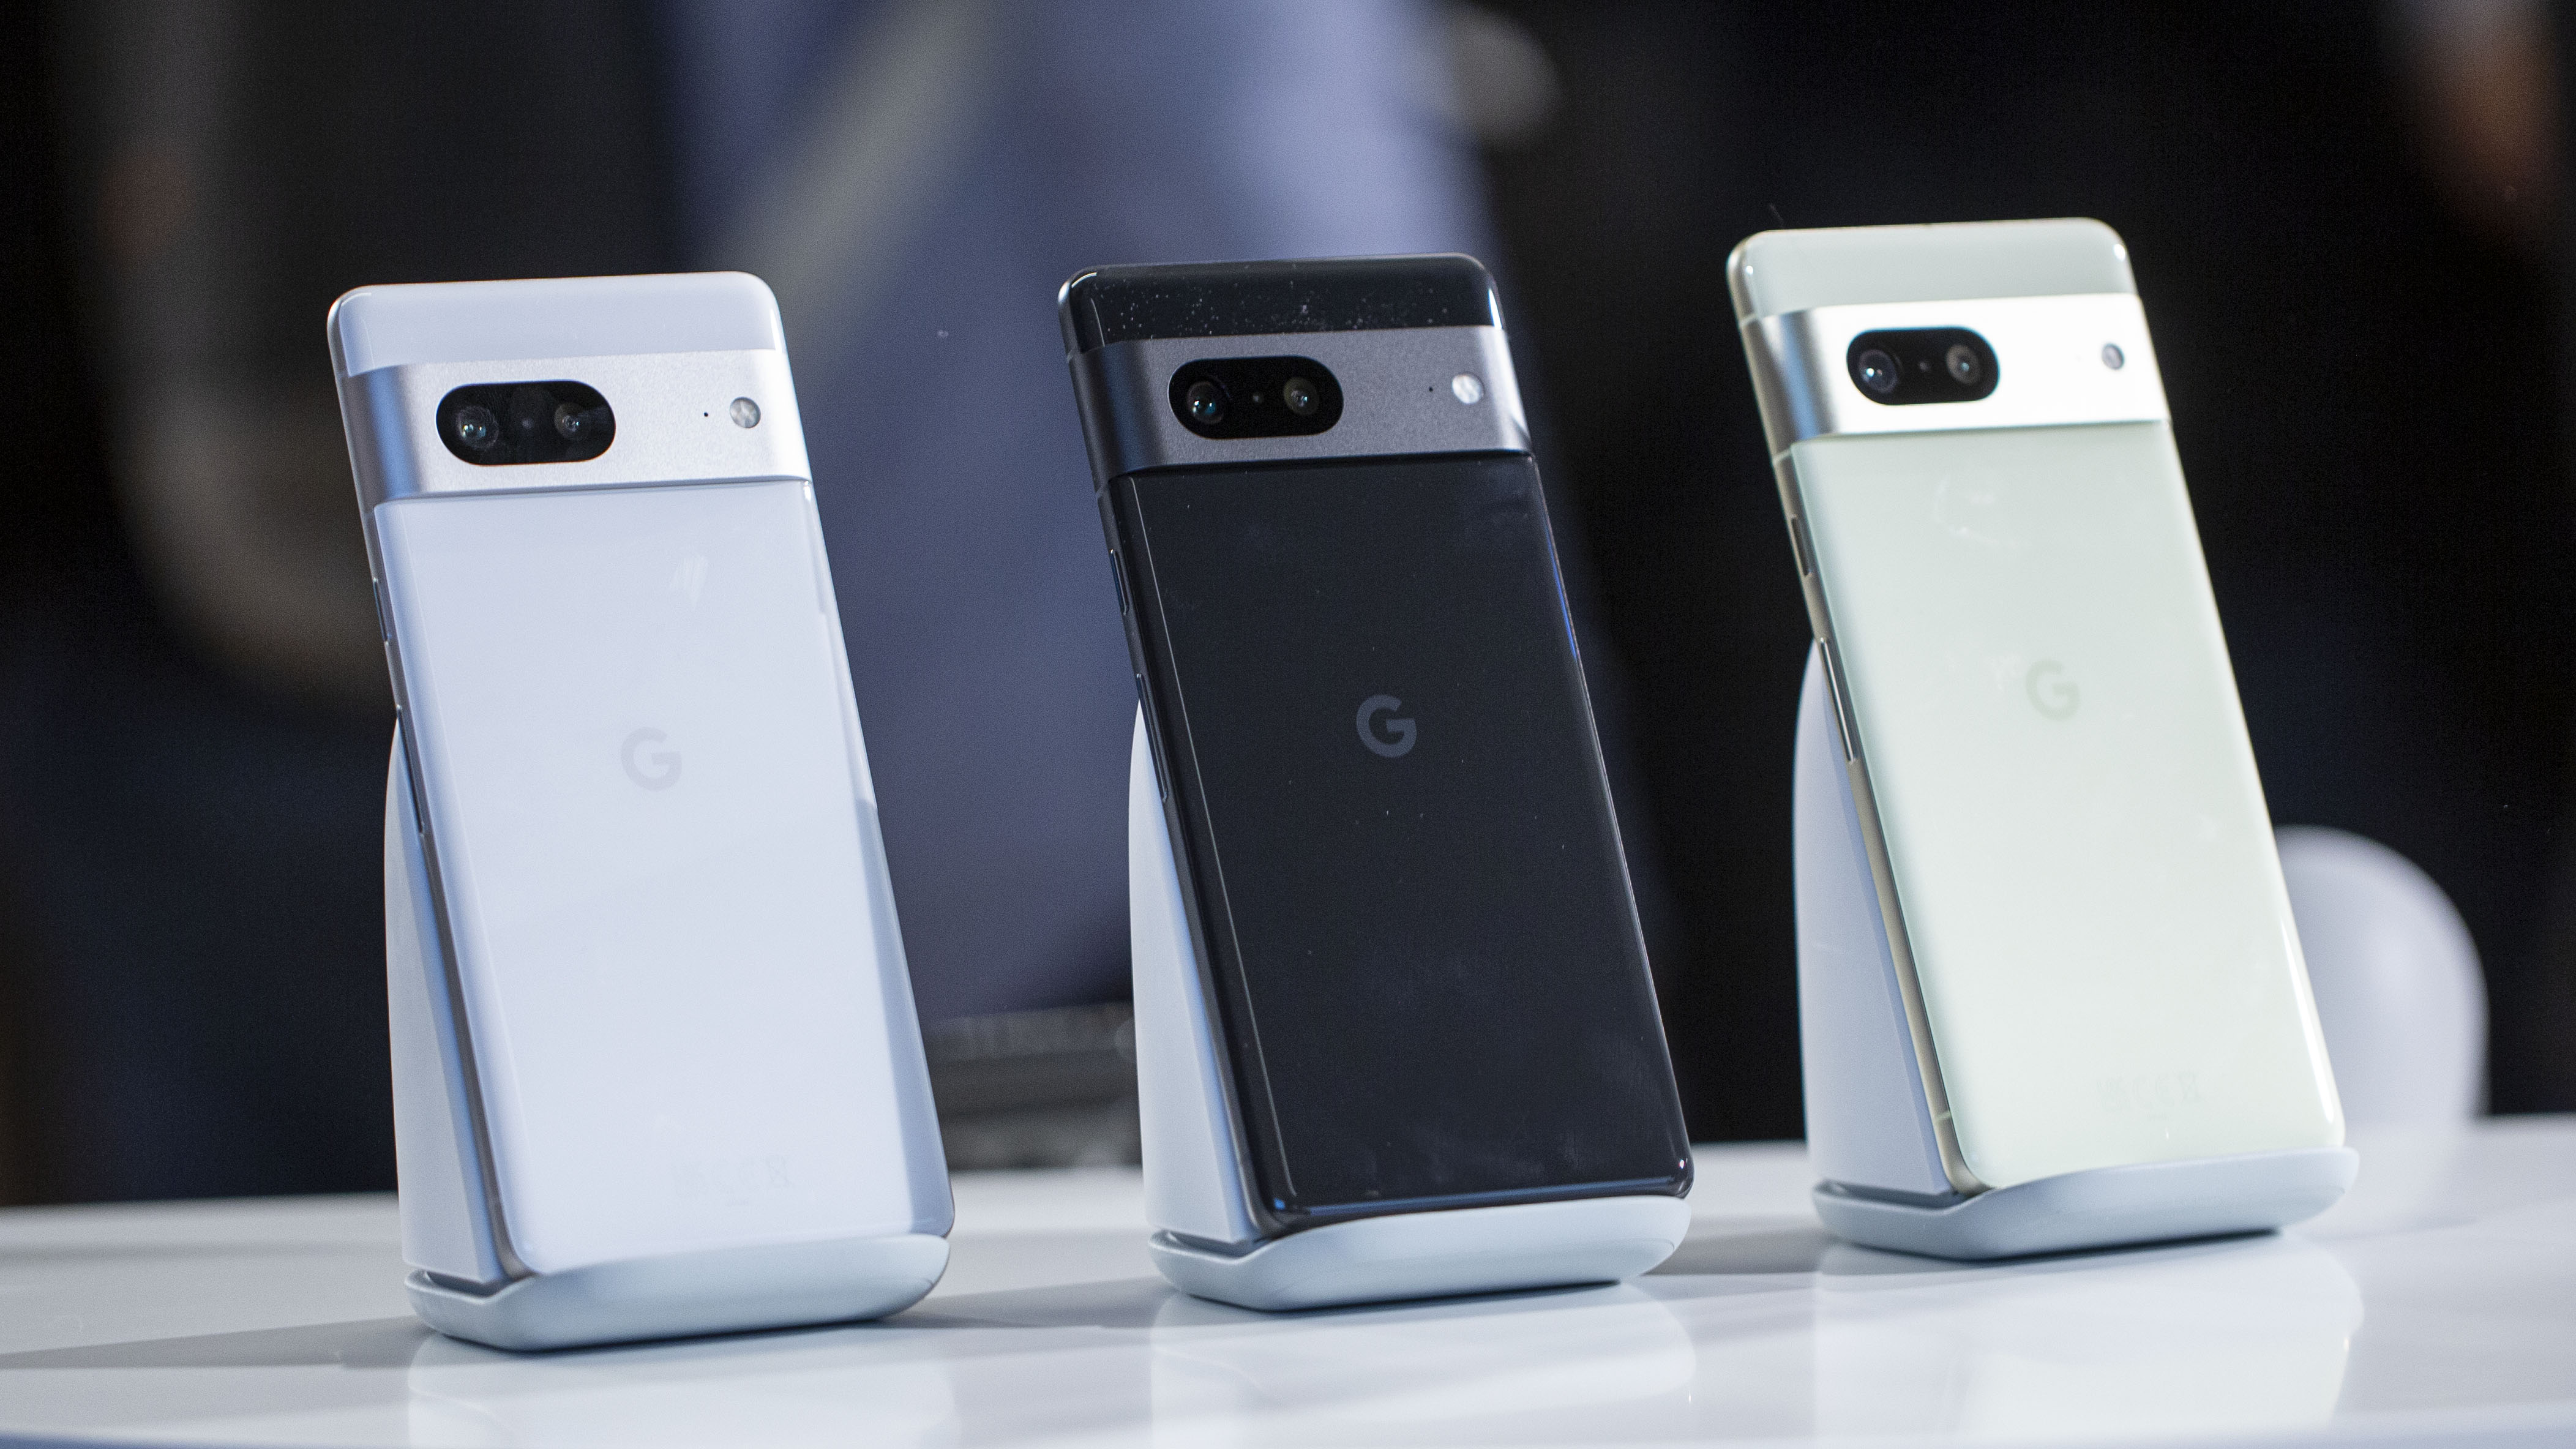  Three Google Pixel 9 Pro Fold smartphones in white, black, and green colors are displayed on podiums against a blurred background.